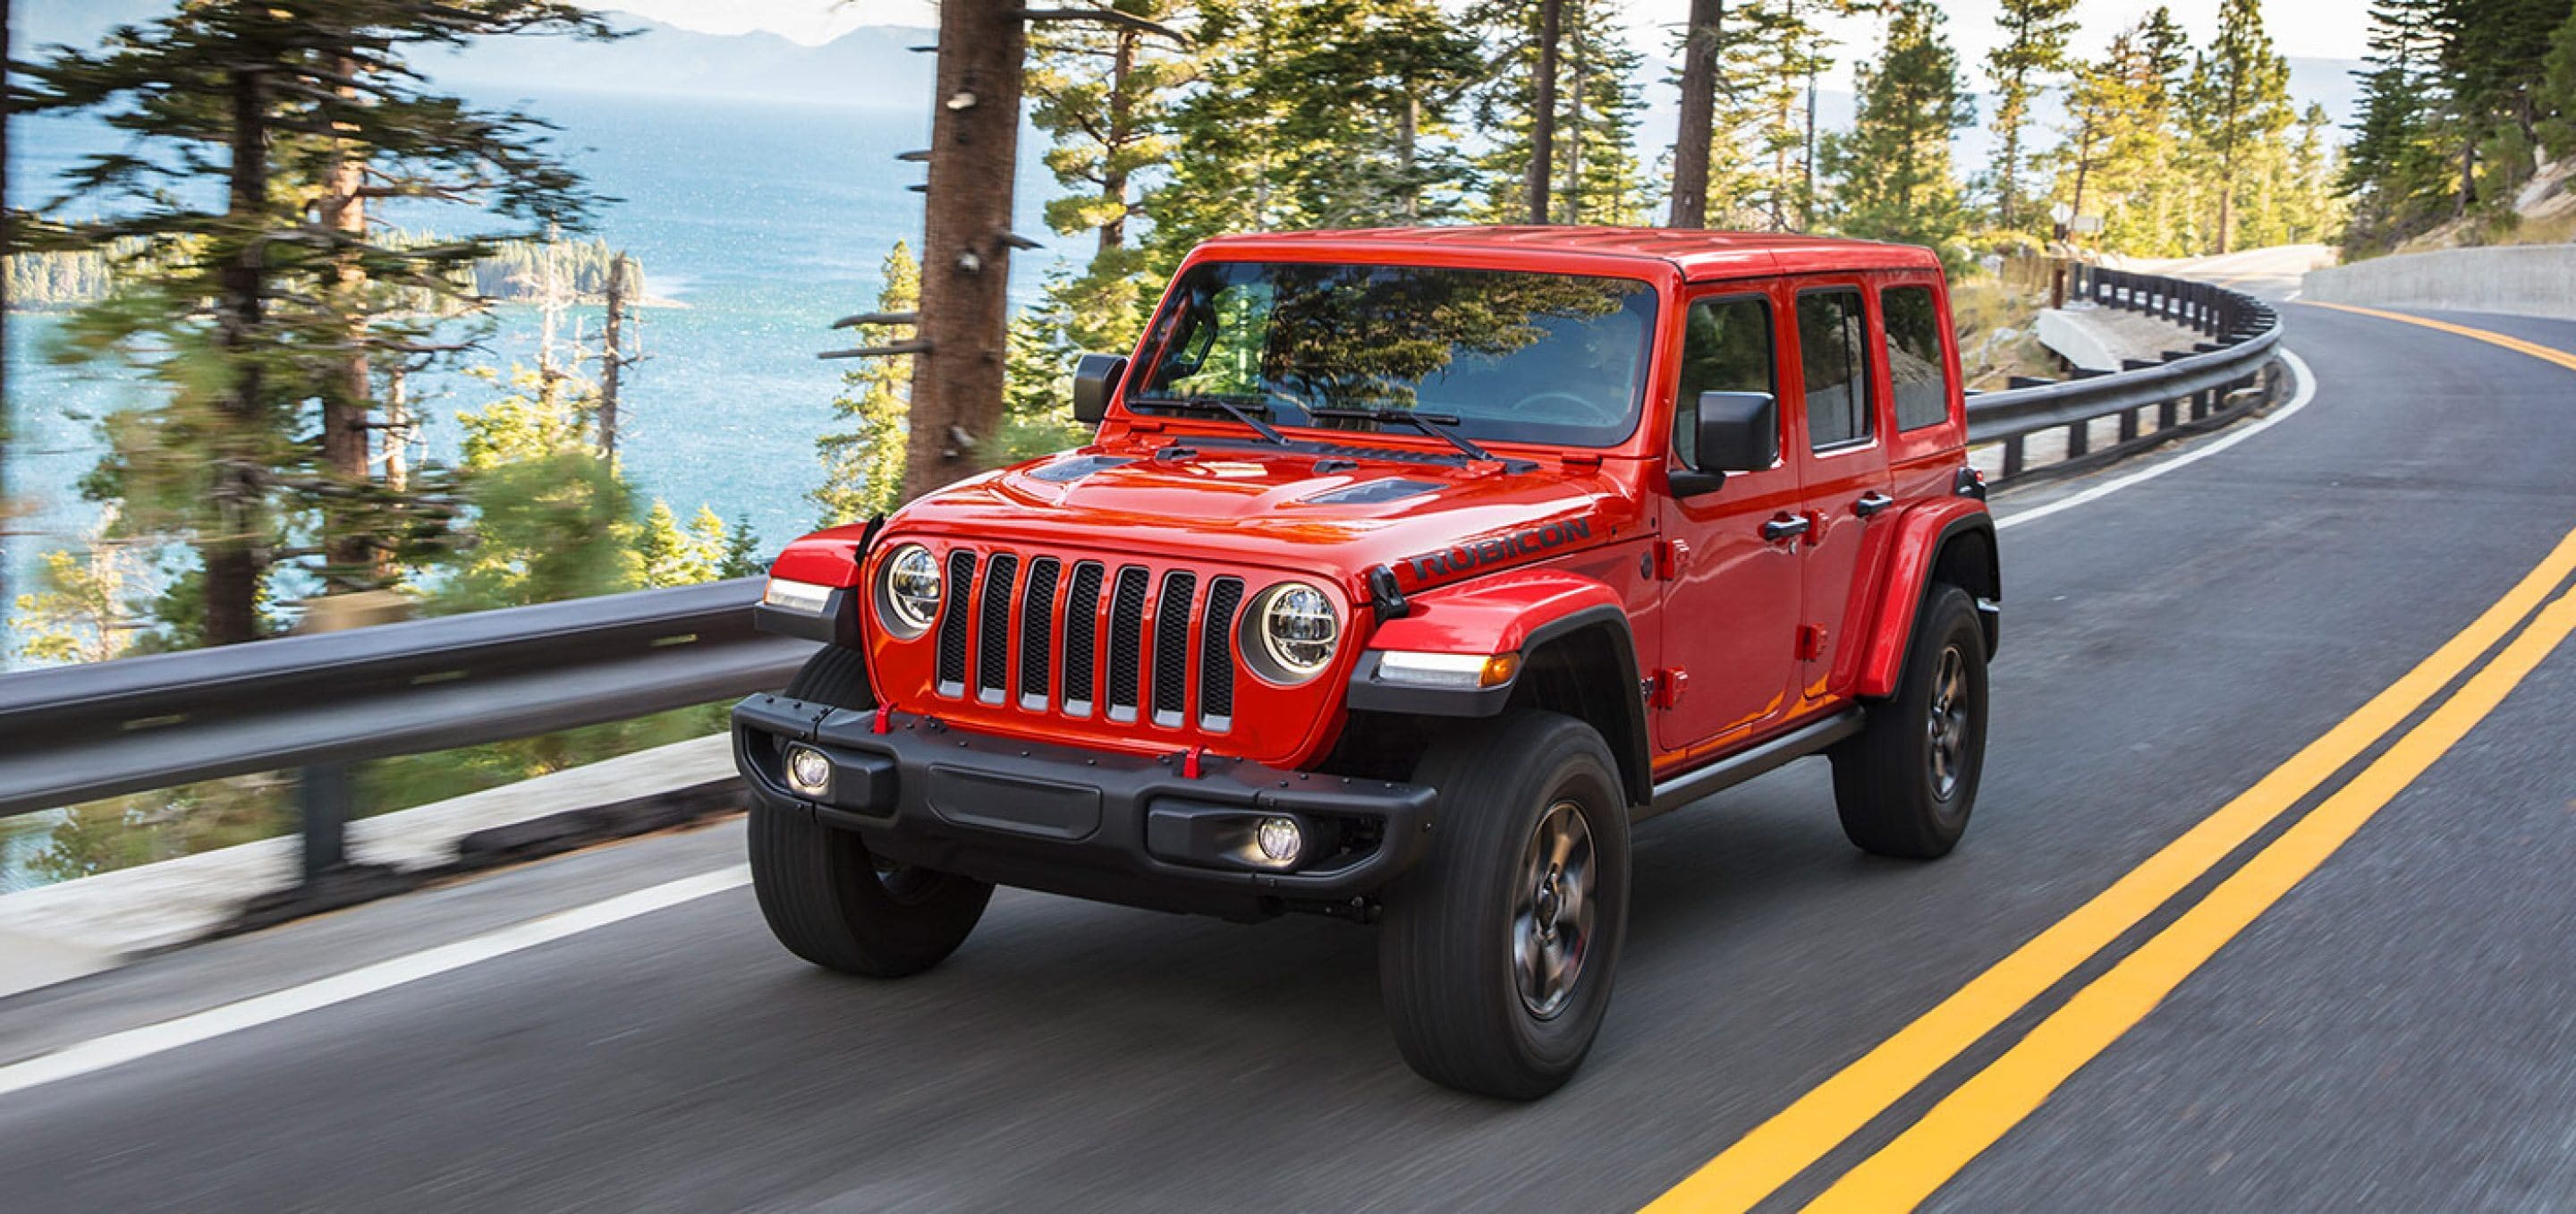 2021 Jeep® Wrangler Outdoorsy Features – Jeff D'Ambrosio Chrysler Jeep  Dodge Blog